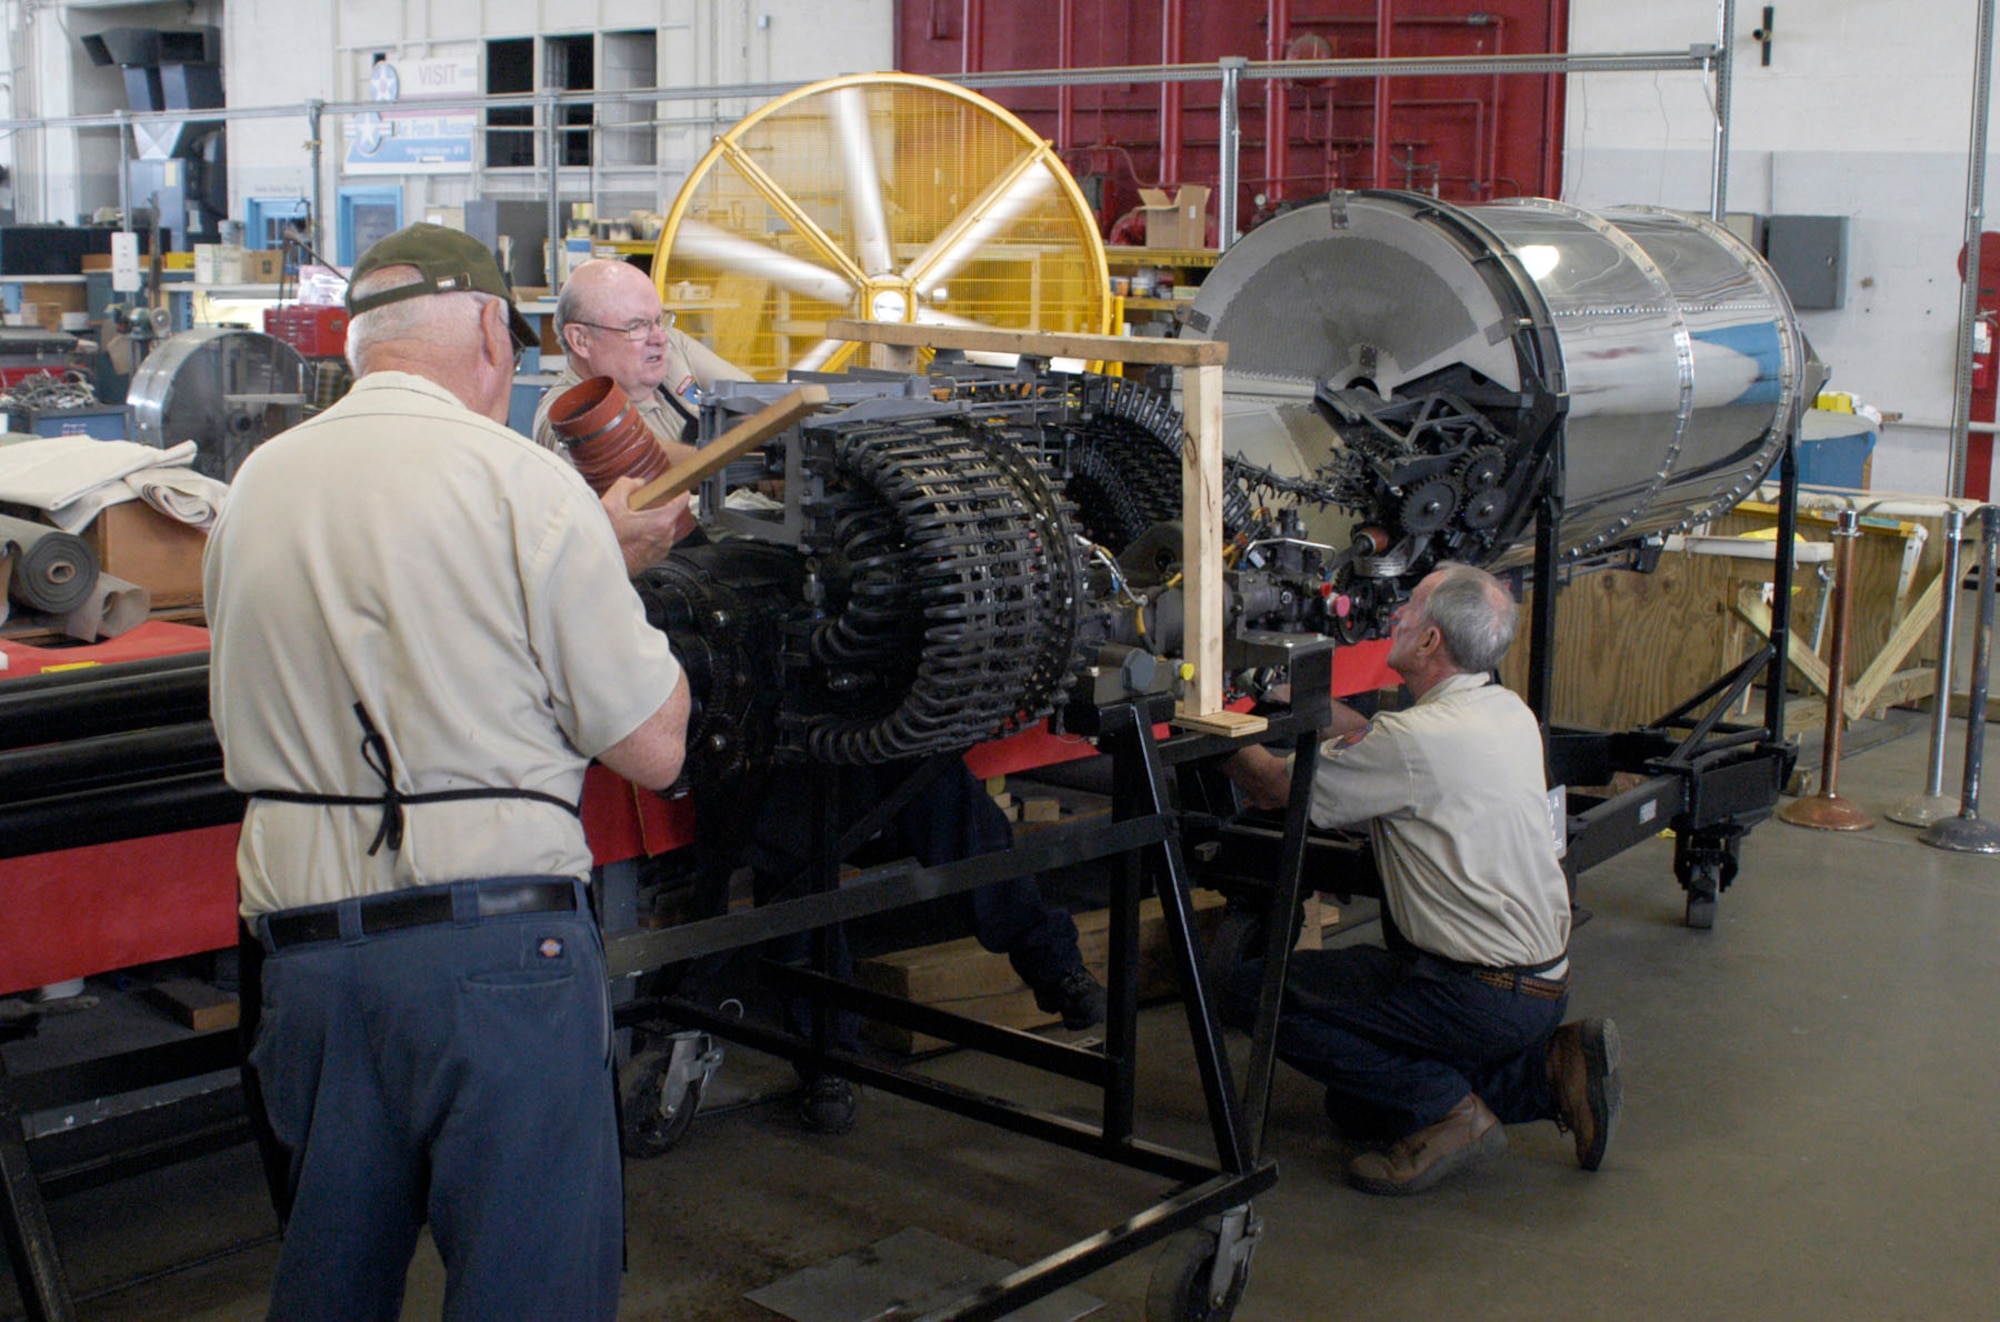 Restoration volunteers (from left to right) Ed Kienle, Garry Guthrie and Lou Thole load cartridges into the GAU-8/A drum. (U.S. Air Force photo)